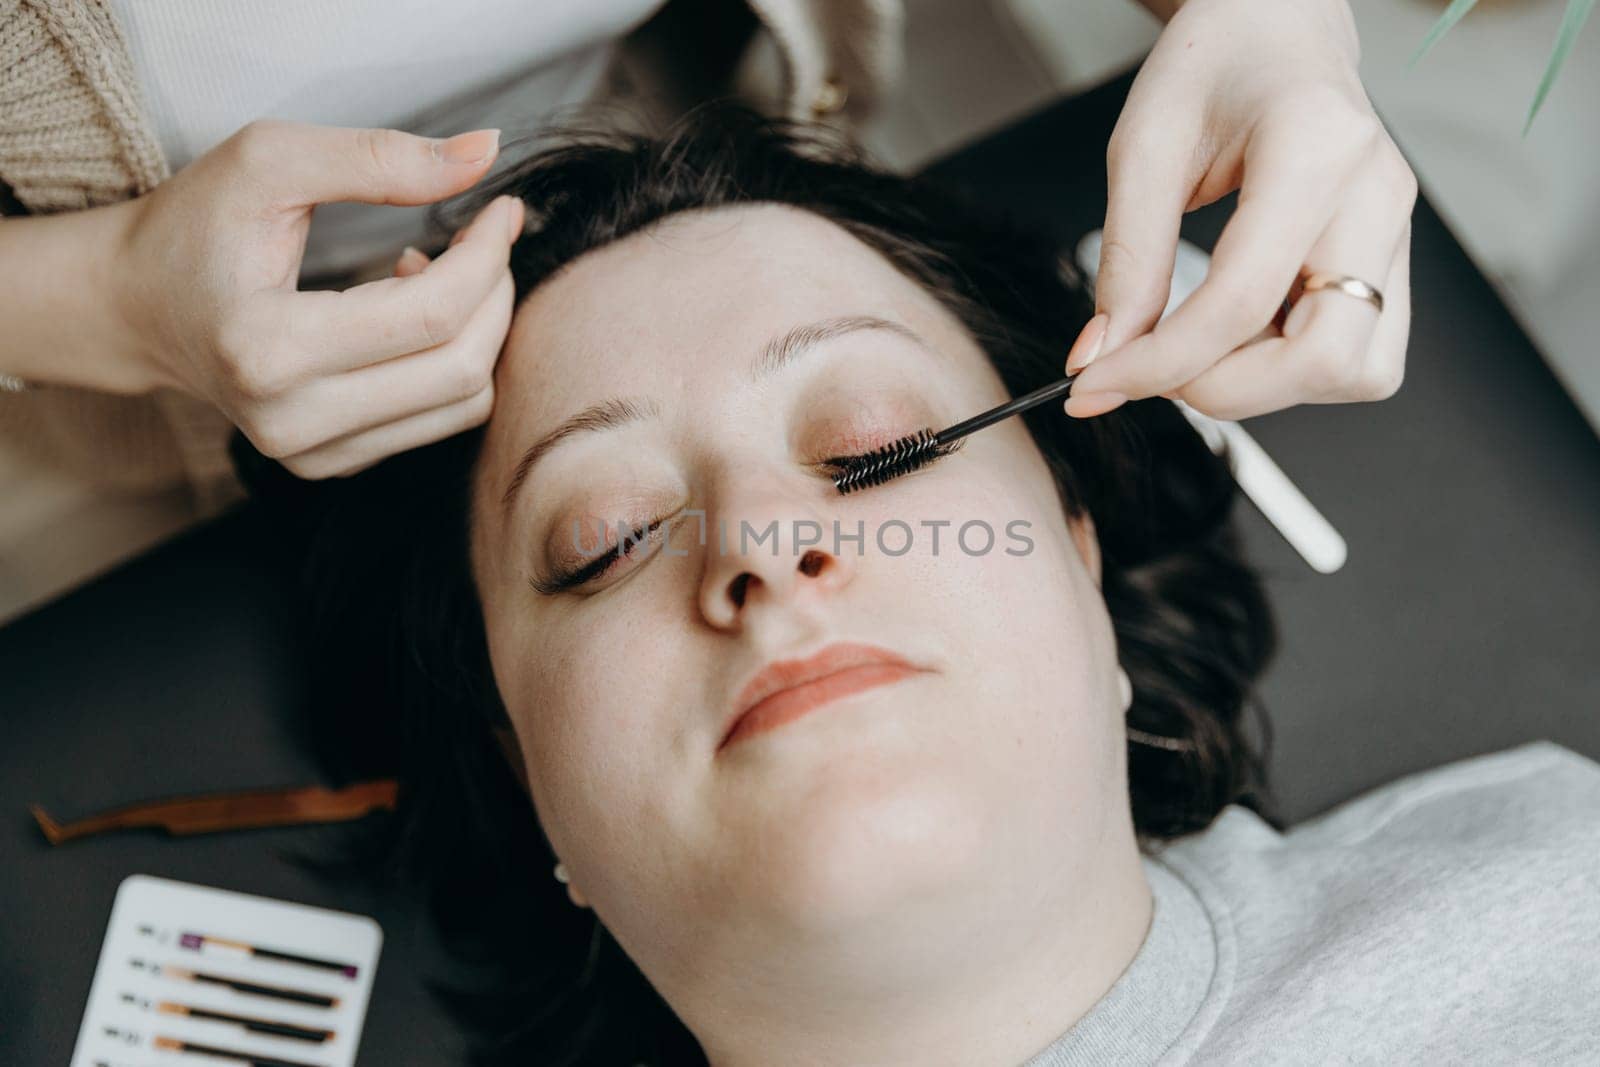 Portrait of one young unrecognizable Caucasian cosmetologist girl who combs artificial eyelashes with a brush on the left of a female client lying on the cosmetology table in the office on a spring day, top side close-up view. Concept of eyelash extensions, beauty industry.